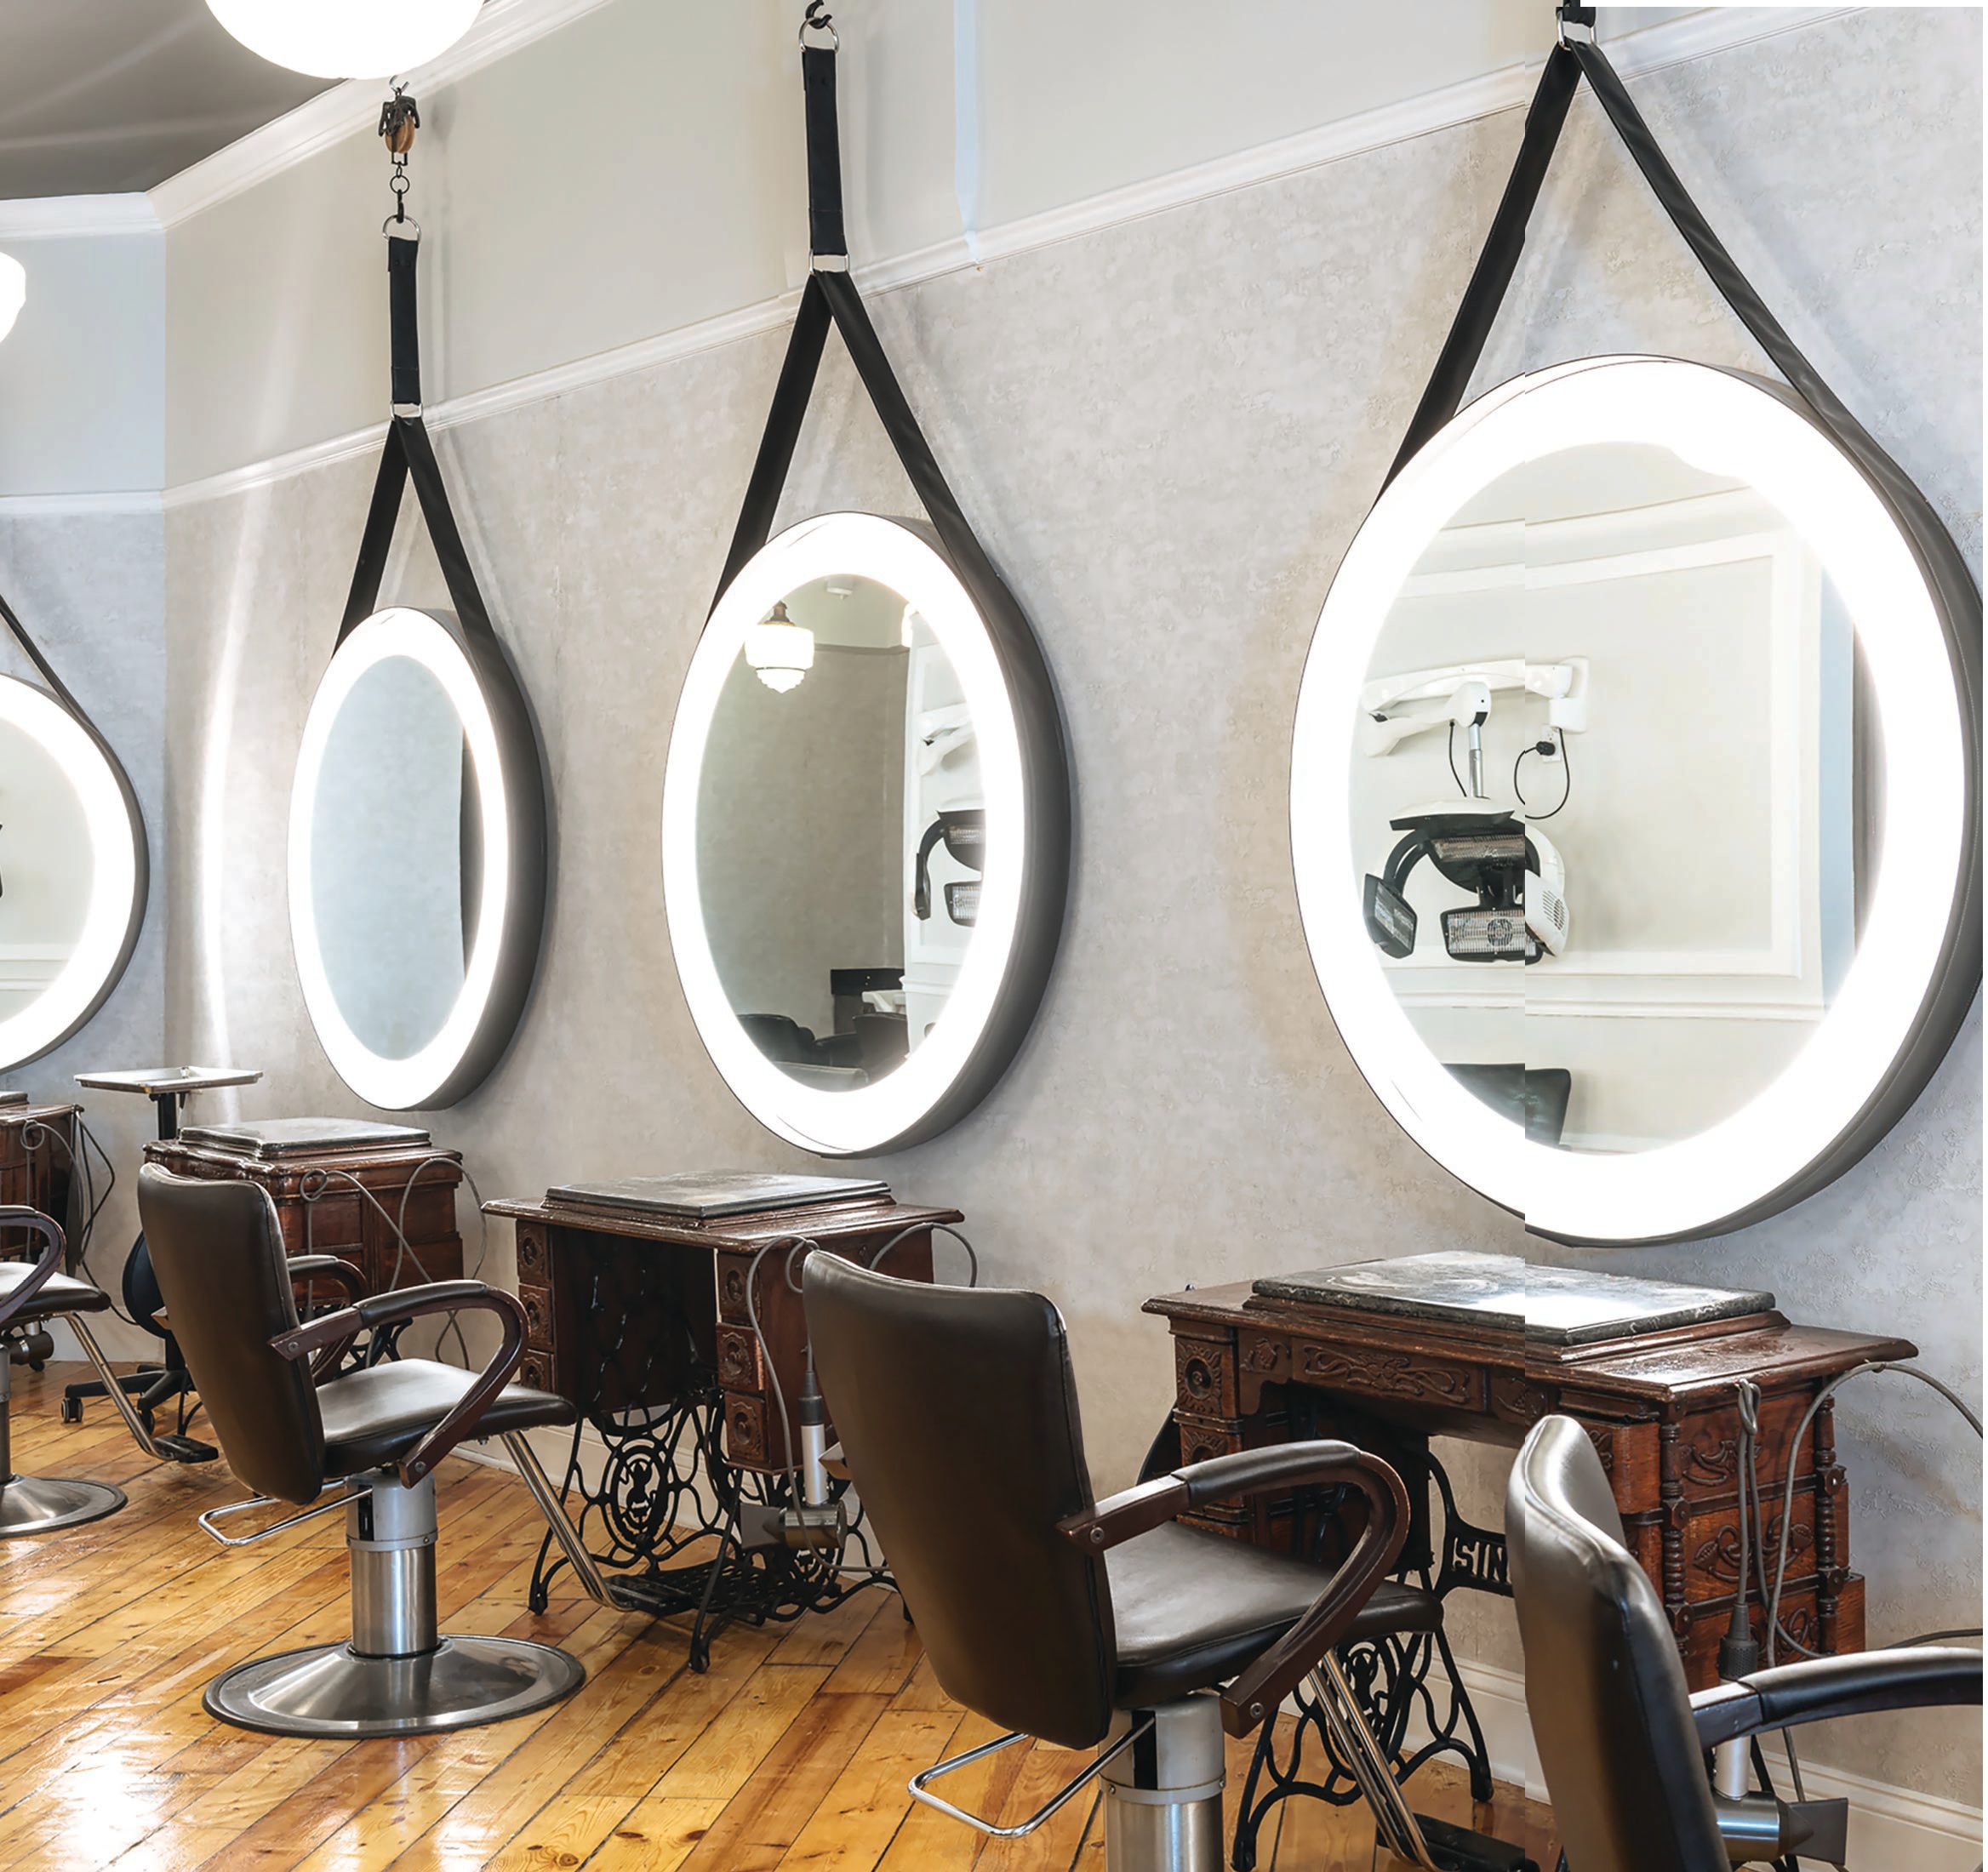 The new location features a.salon’s signature circular mirrors. PHOTO BY SEAN HOPKINS